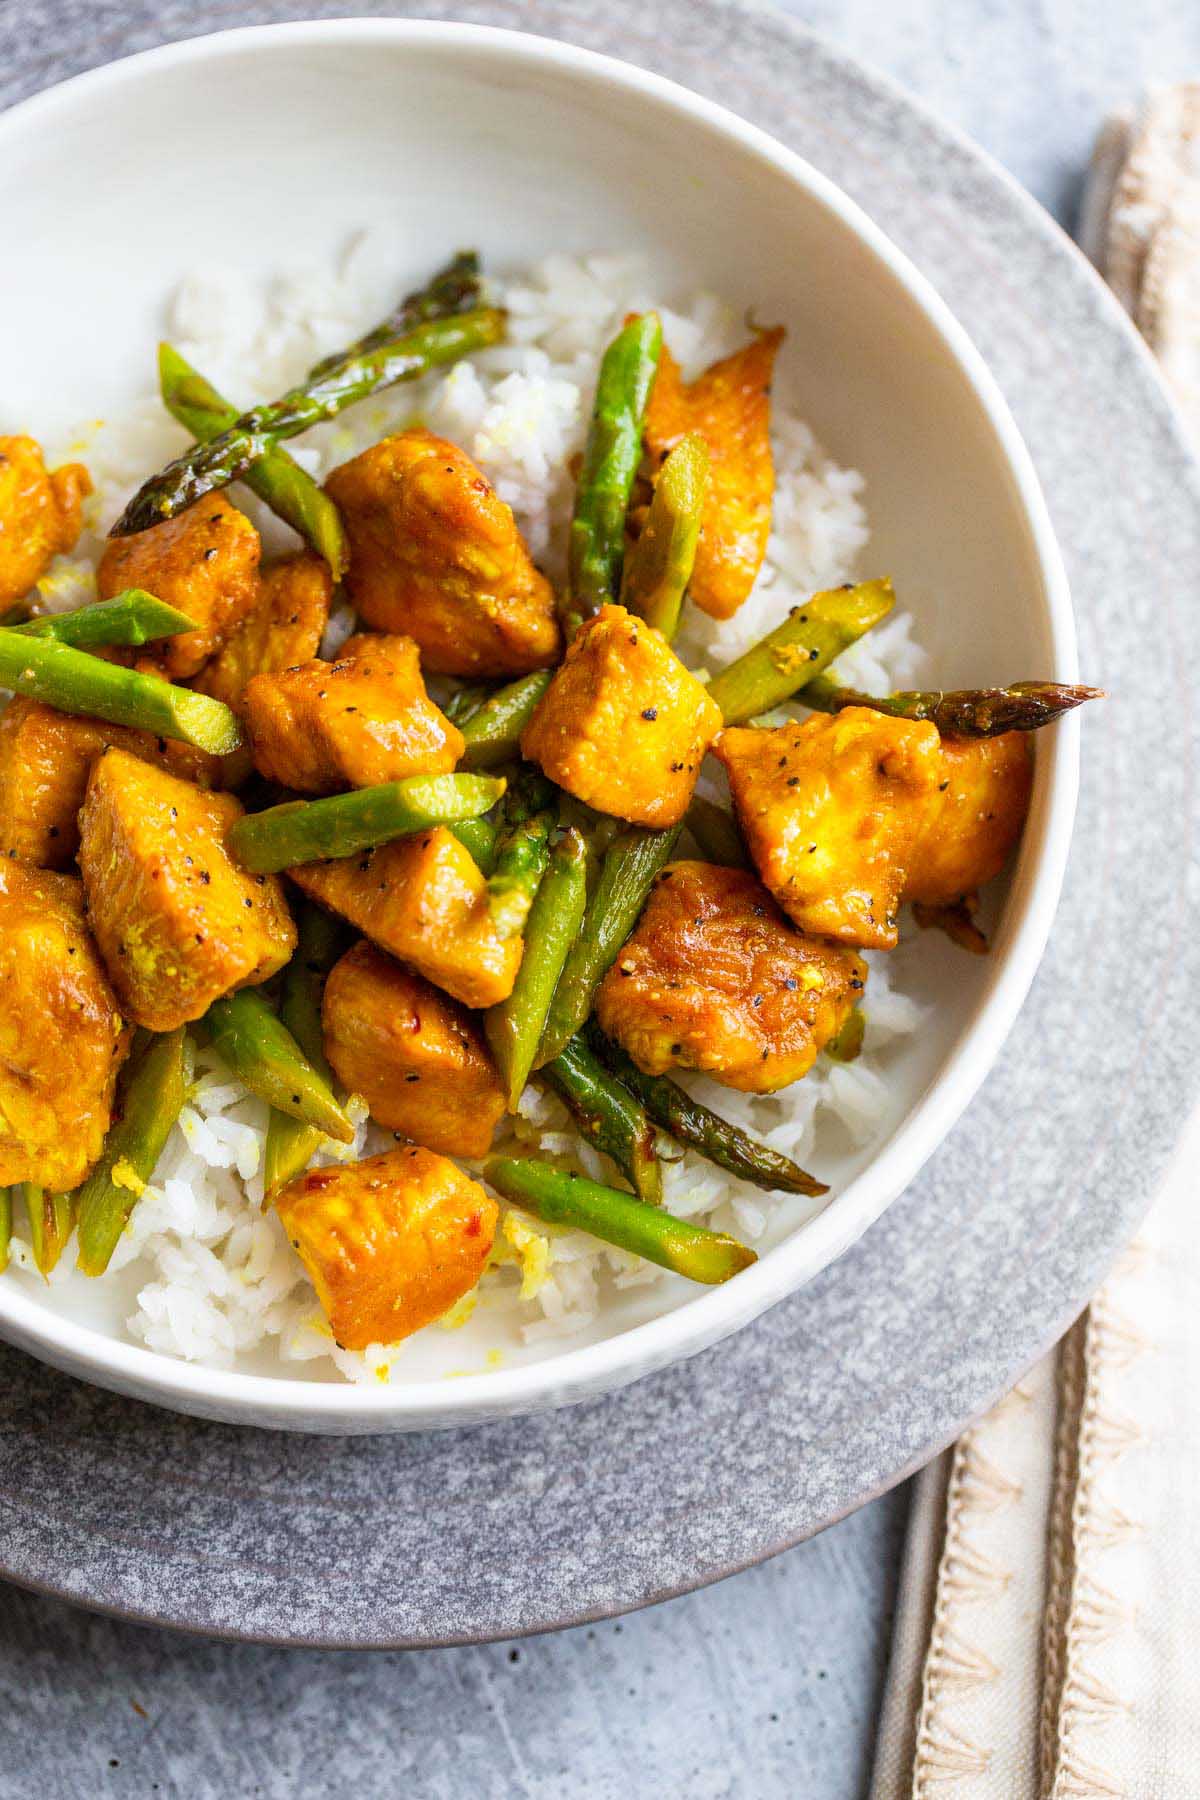 Chicken and asparagus over rice.